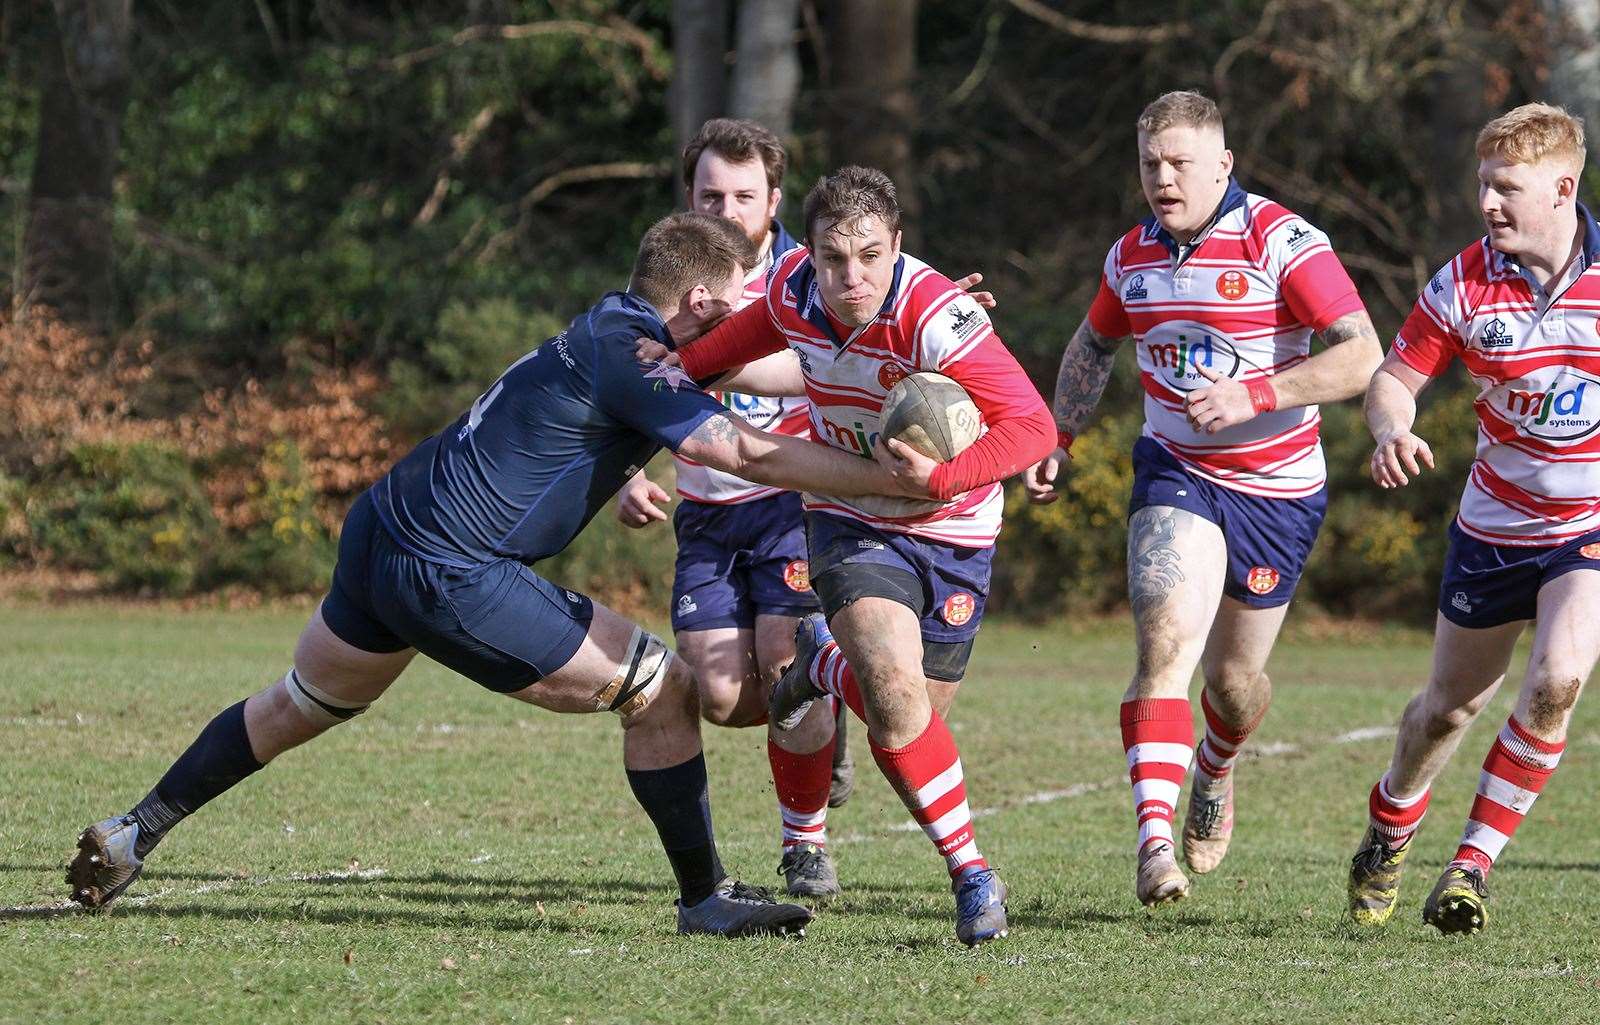 Cameron Hughes makes a break, handing off the Lossiemouth second row. In support are Mark Taylor, Lewis Scott and Ewan Simpson. Picture: John MacGregor